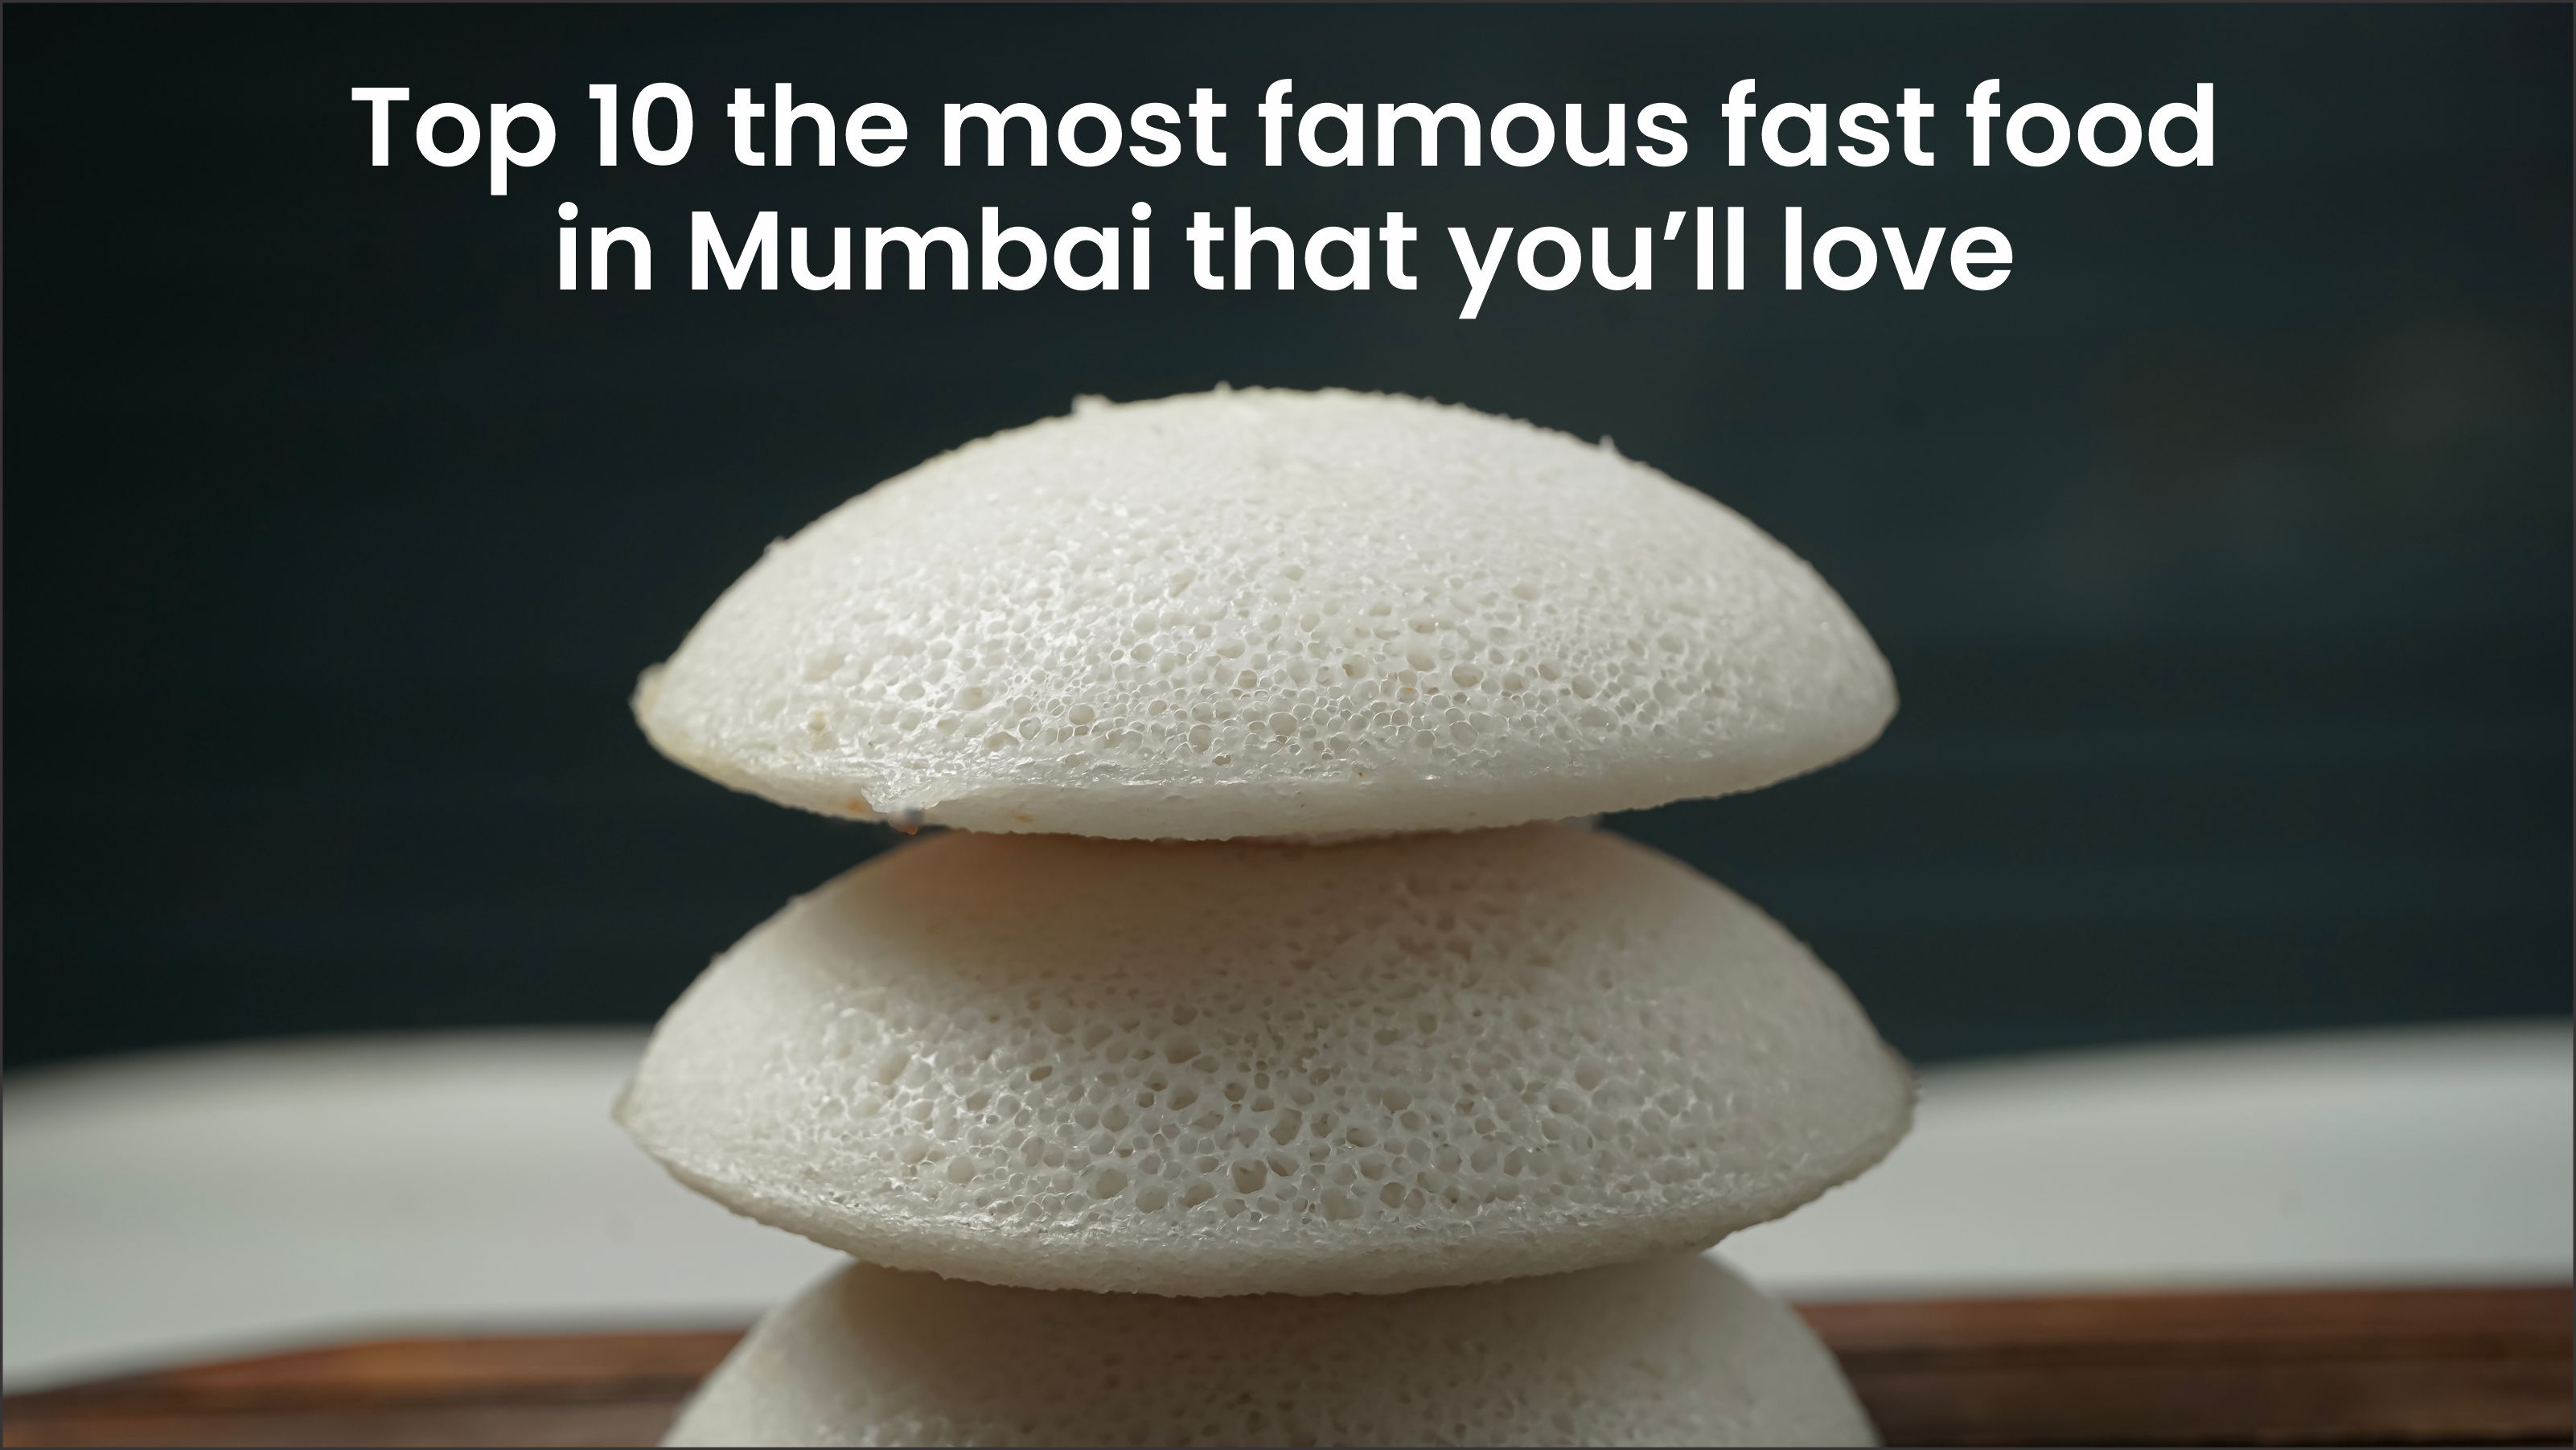 Top 10 the most famous fast food in Mumbai that you’ll love